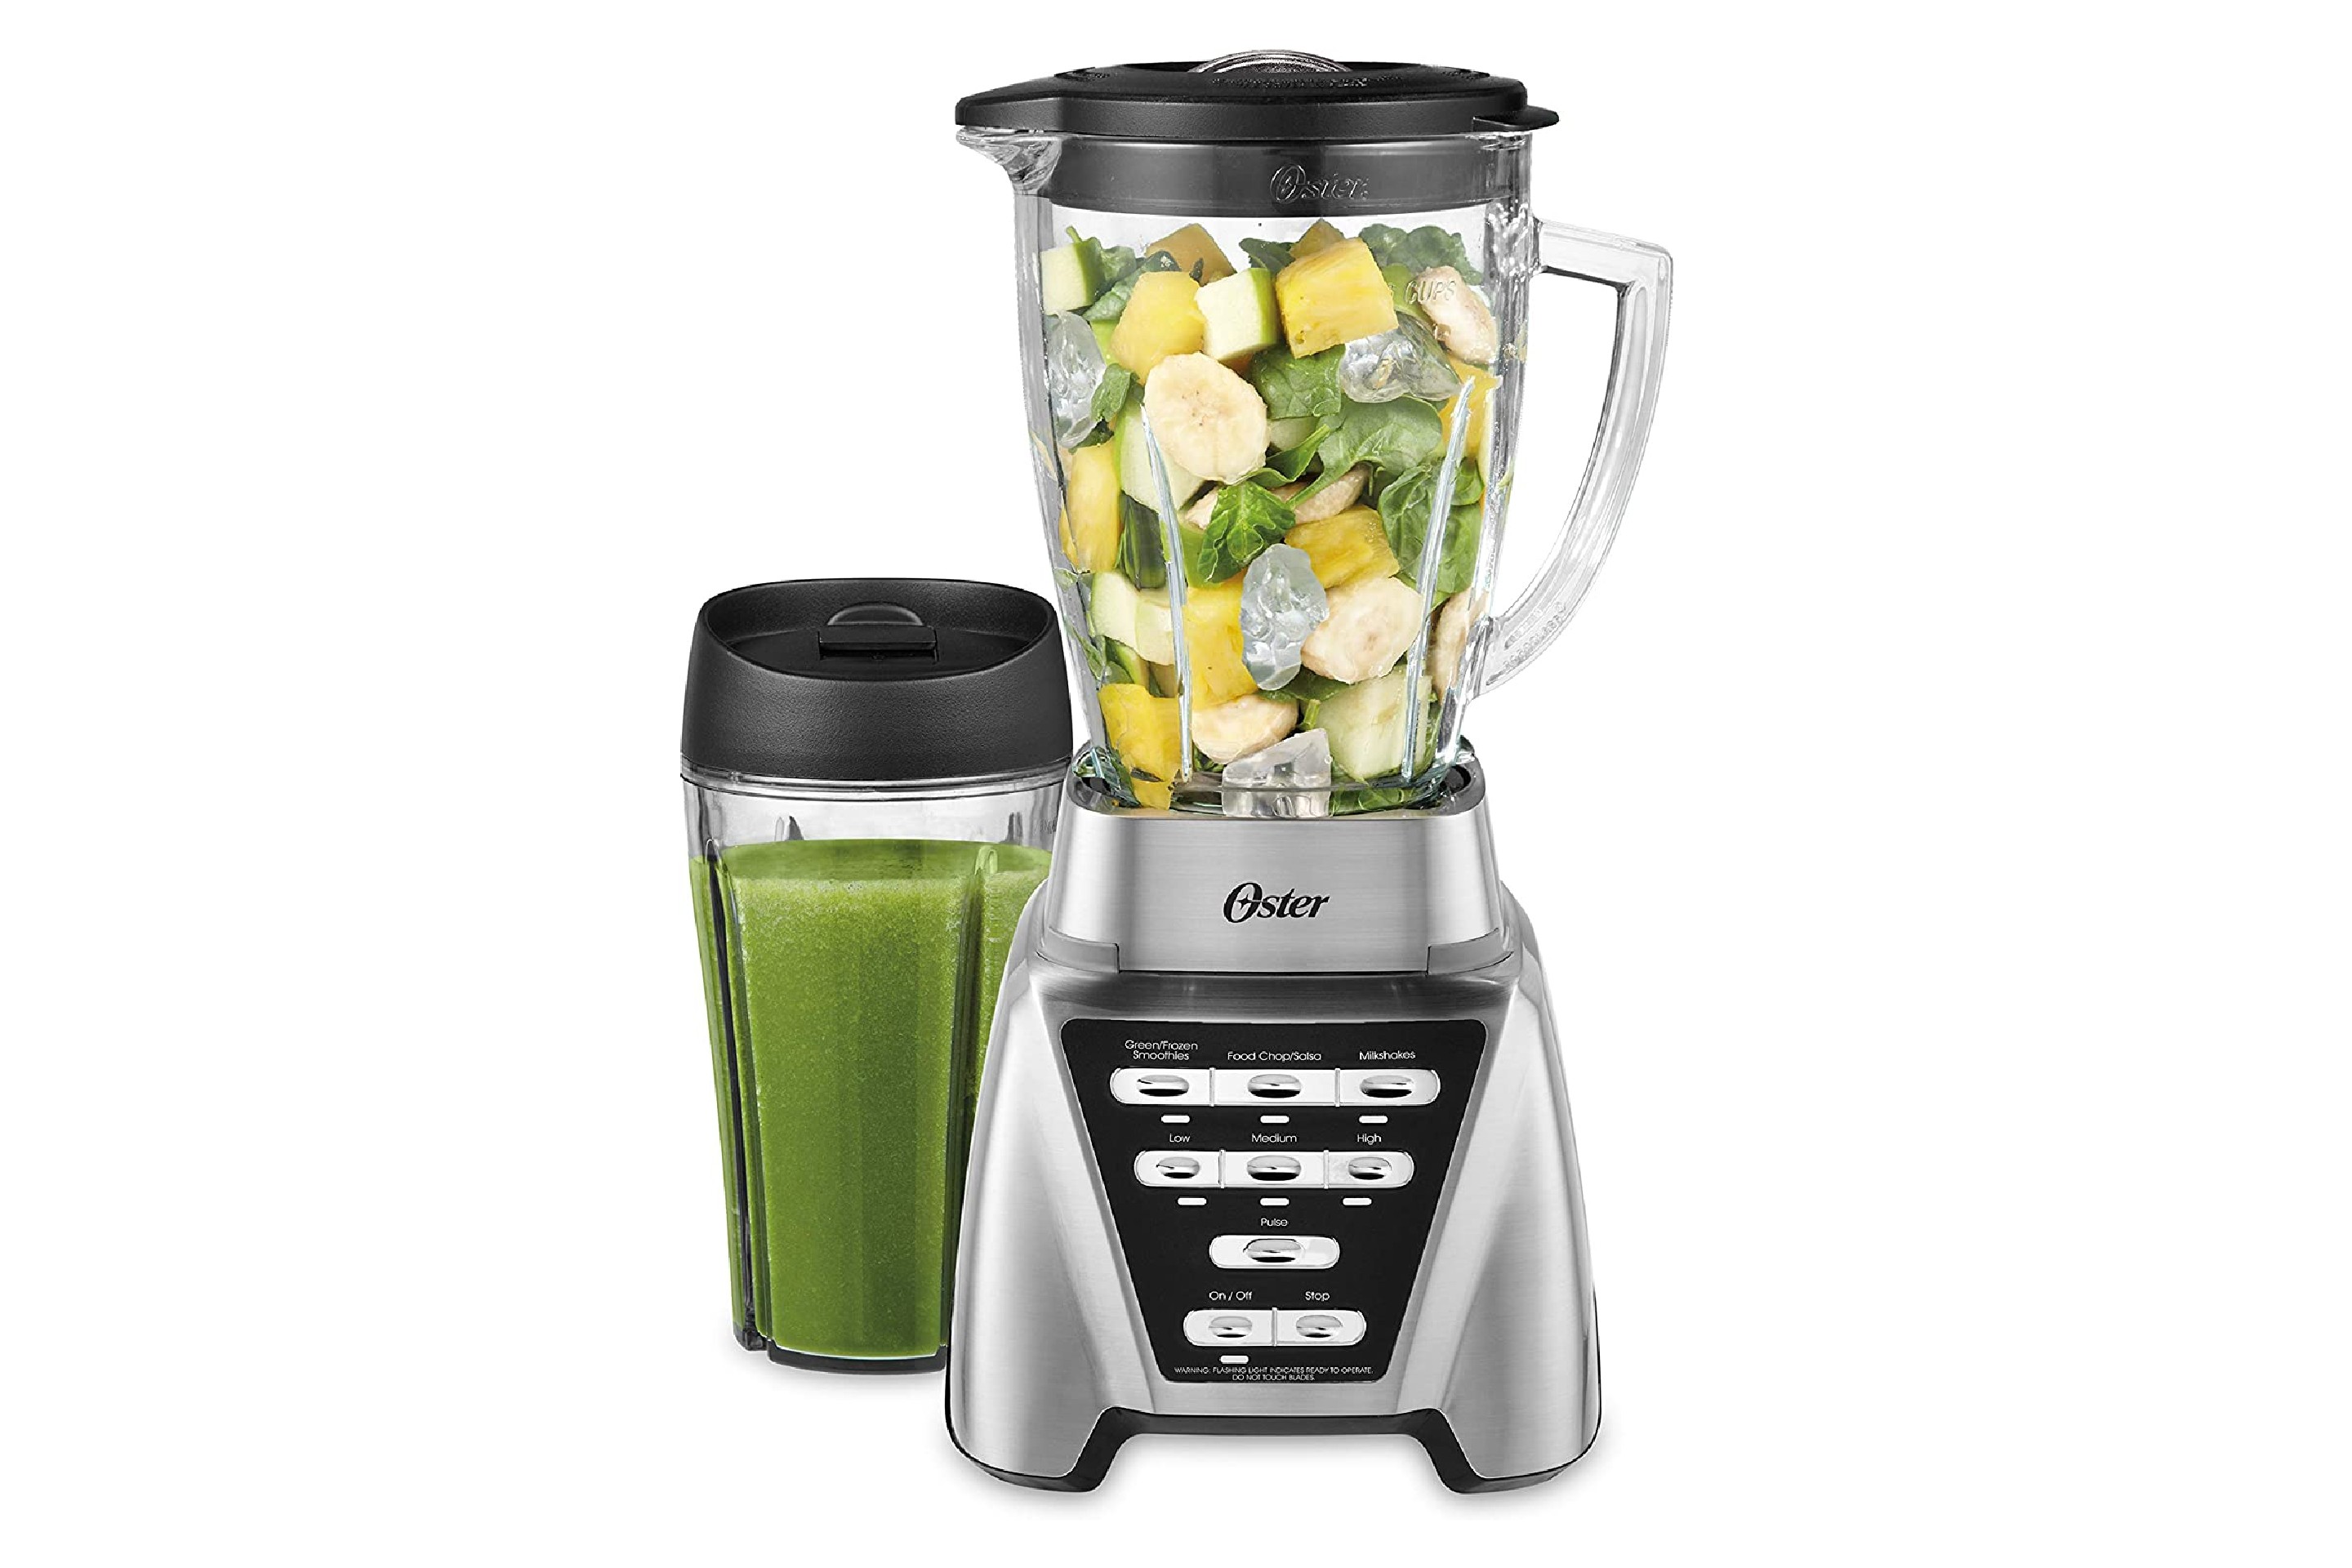 Make Smoothies at Home That are Actually Smooth: Ninja BL660 Blender Review